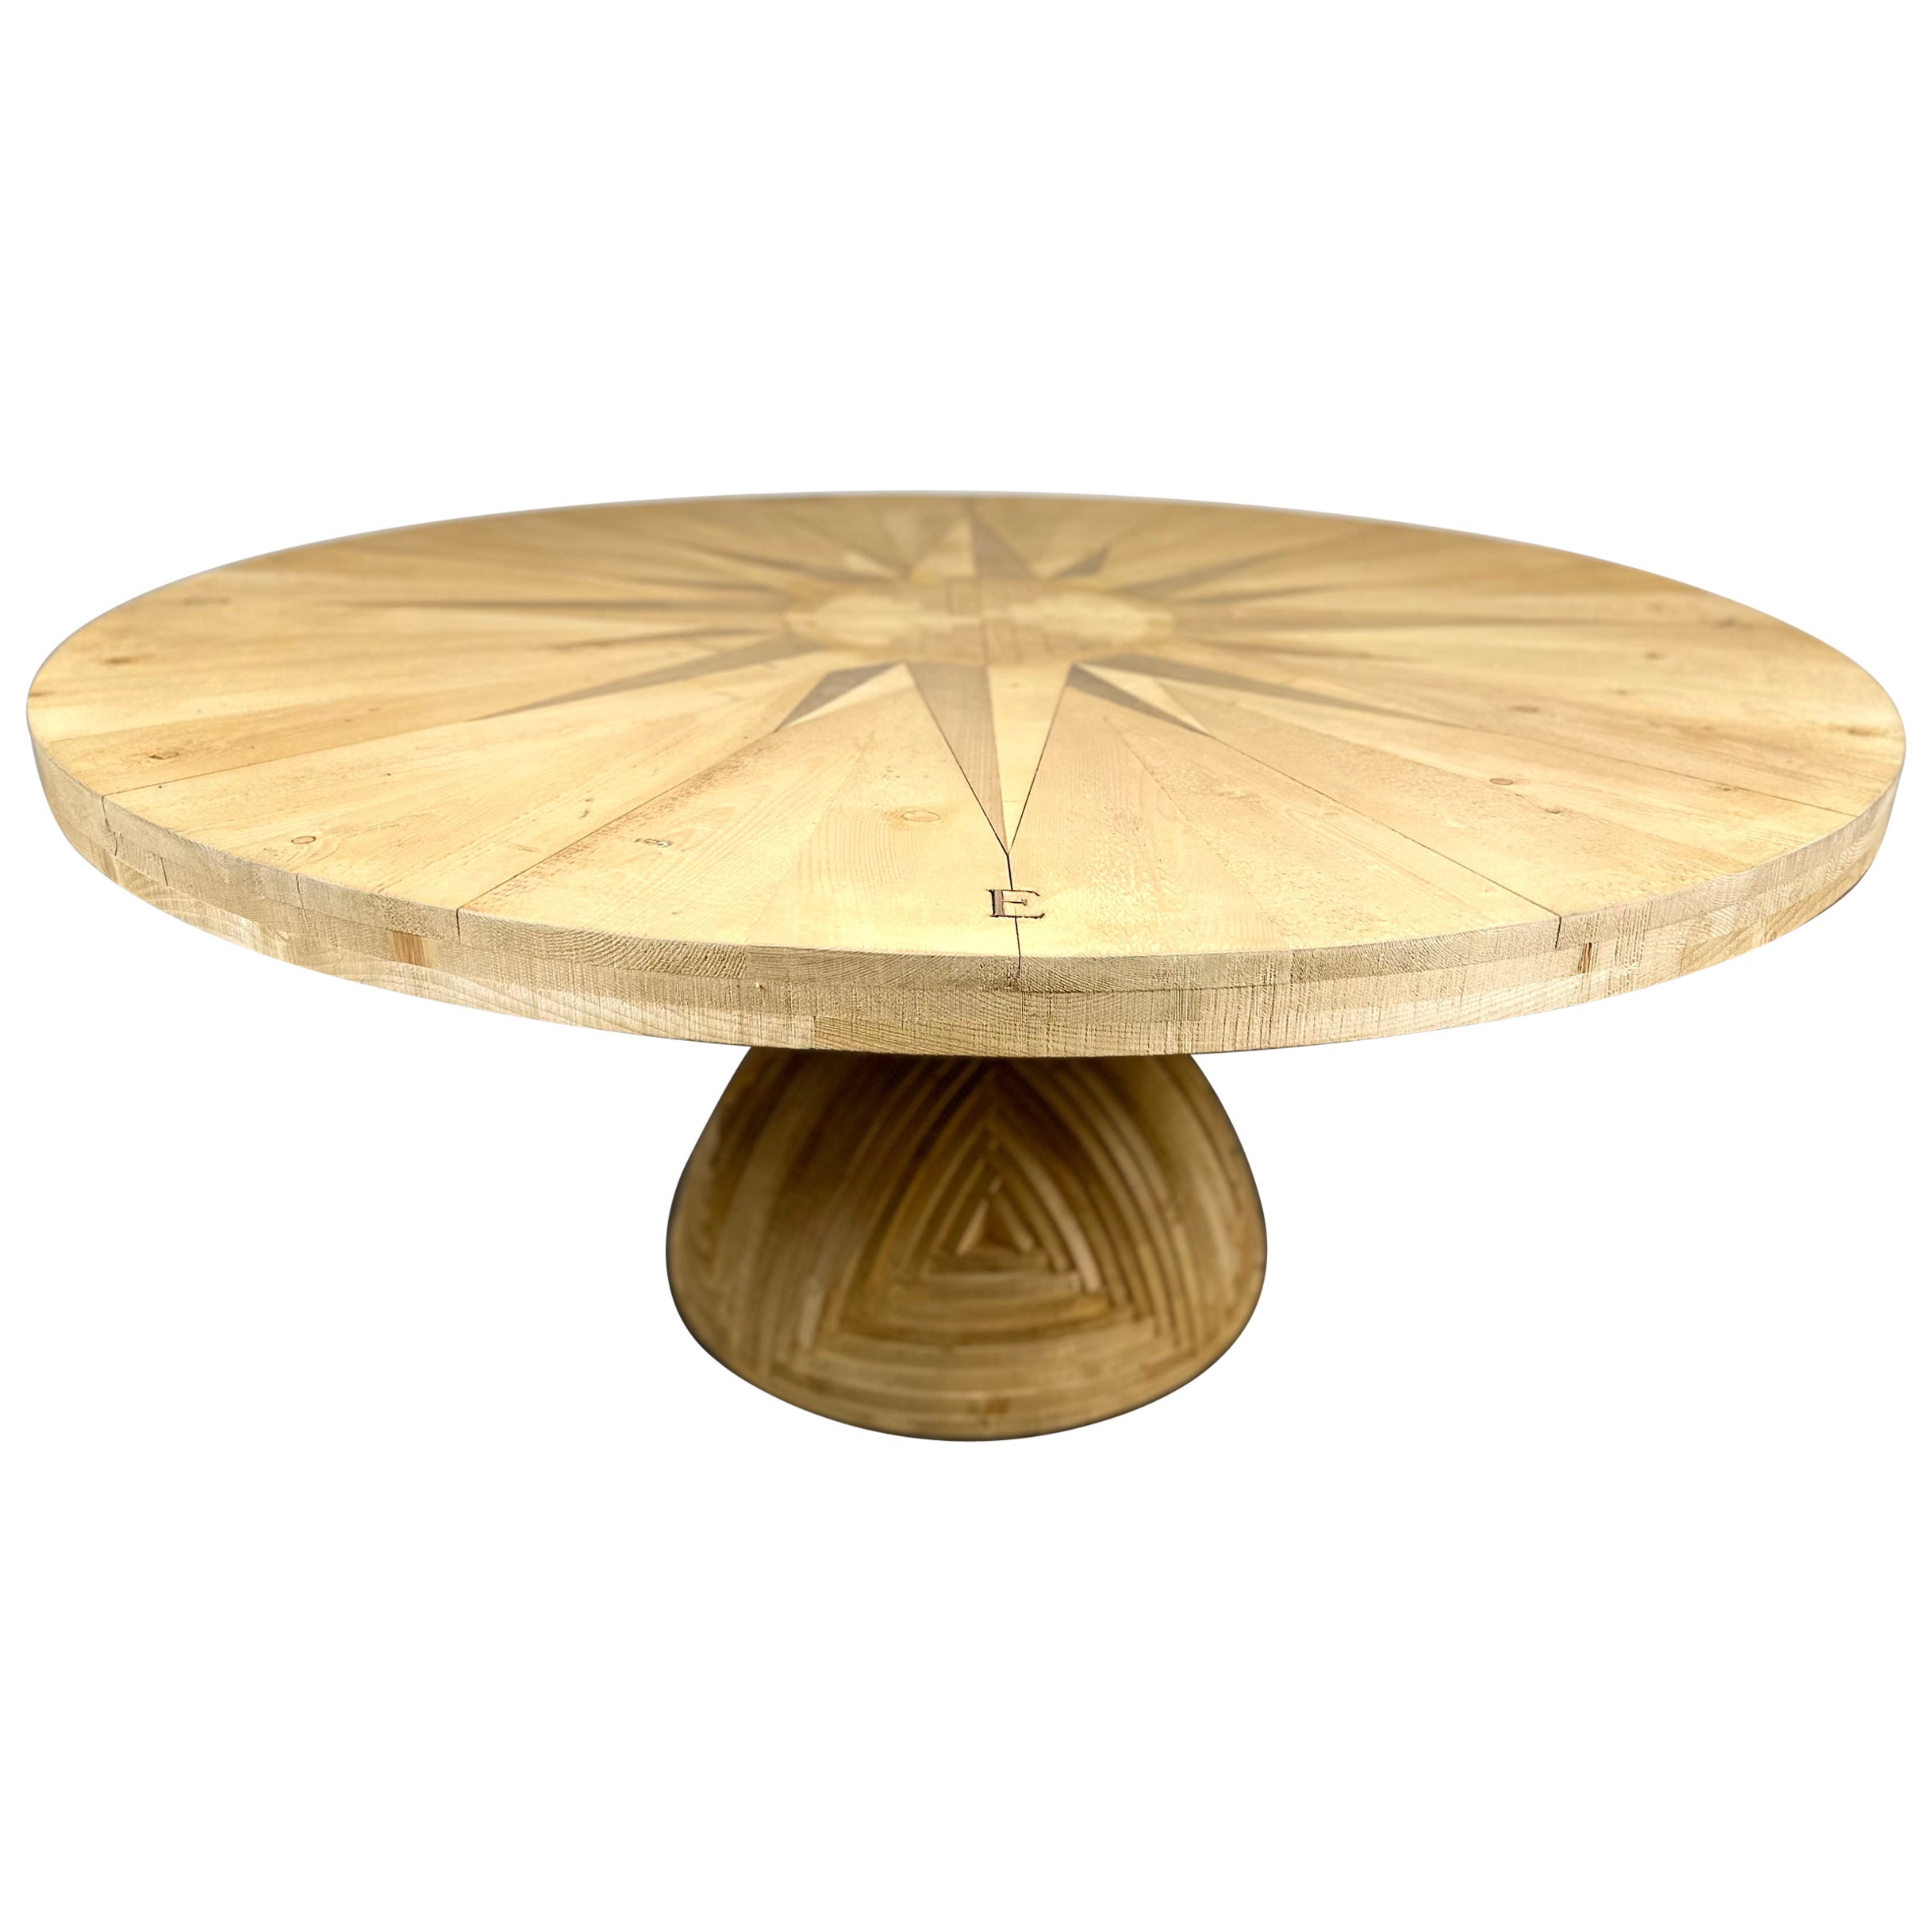 MARIO CEROLI ‘La Rosa dei Venti’ table Pinewood with inlays 
Manufactured by Poltronova, Italia, 1974.
Manufacturer's brand marked with fire on the table structure.

This magnificent table has a precious inlay of the Wind Rose on the top and we note